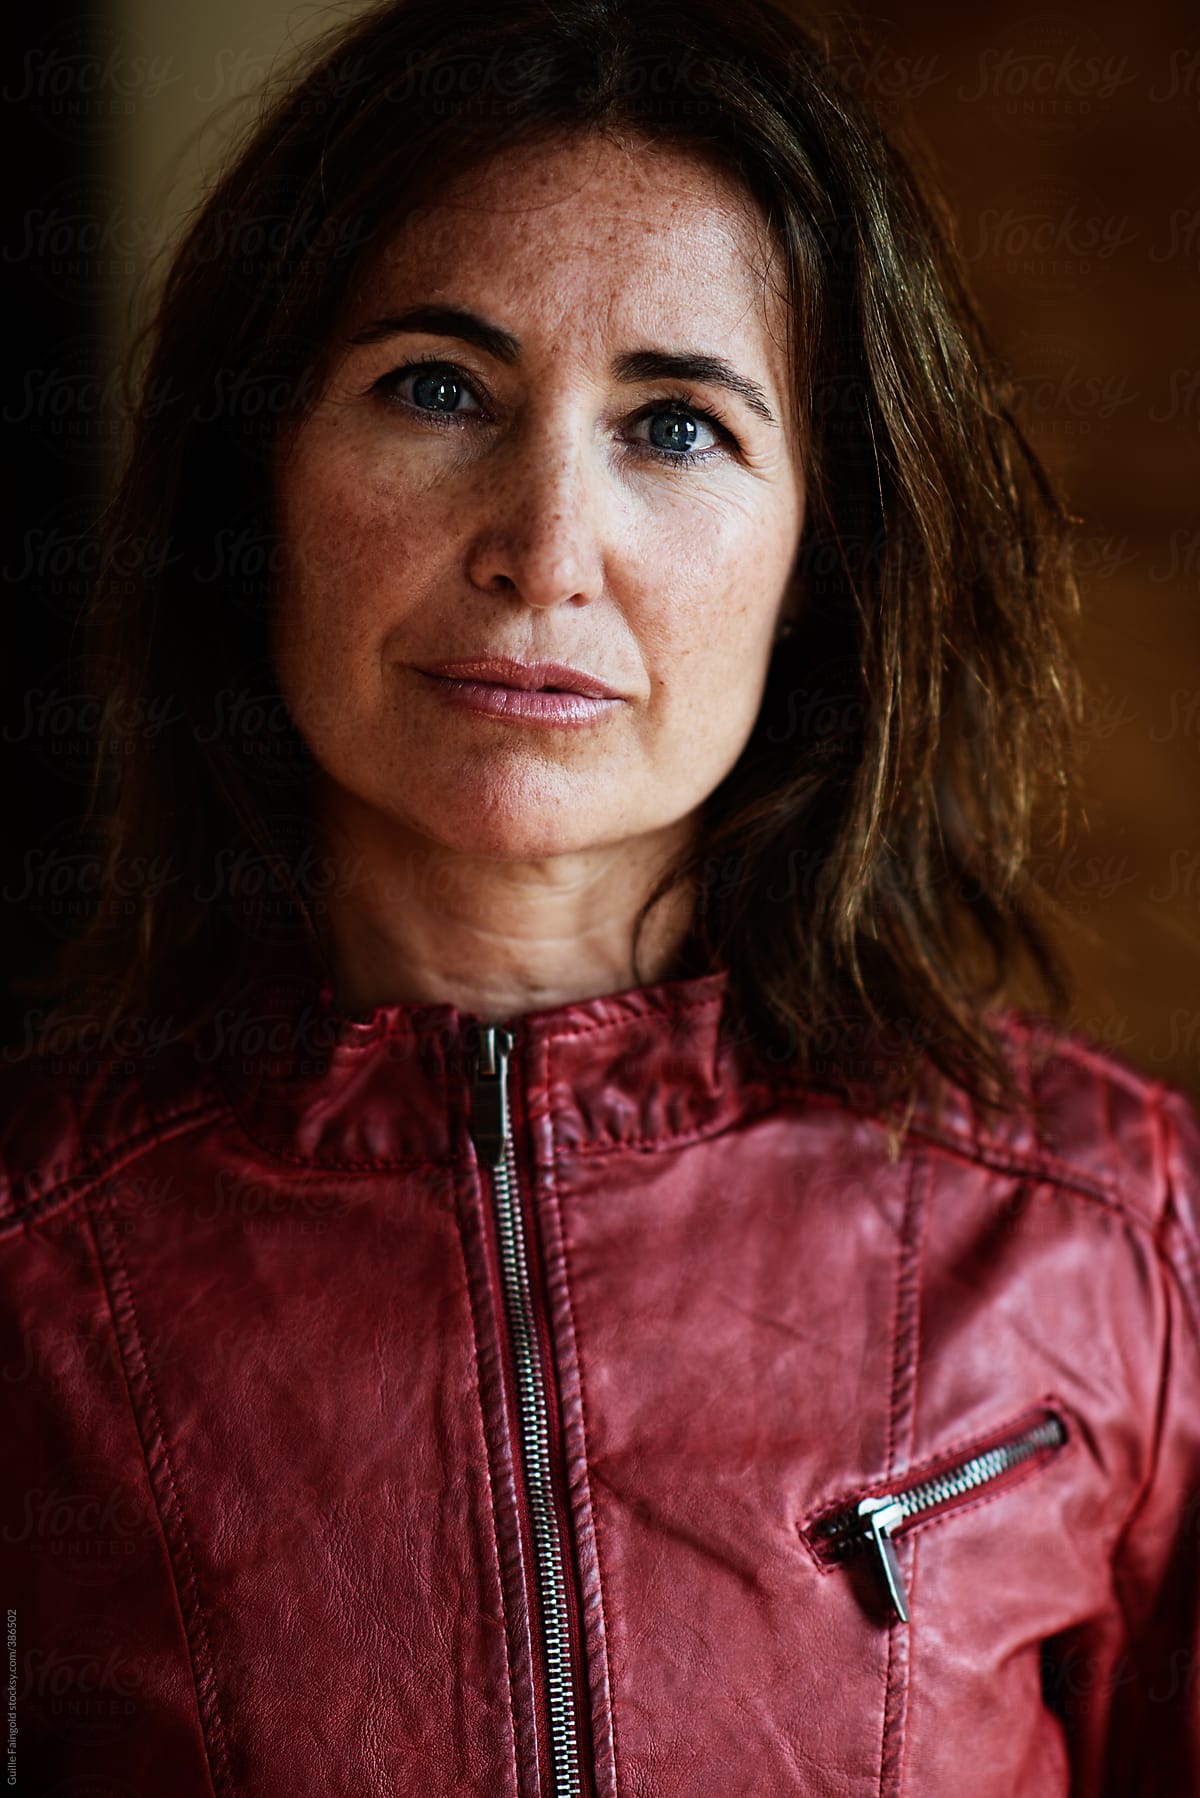 Mature brunette pics Mature Brunette In Red Leather Jacket By Guille Faingold